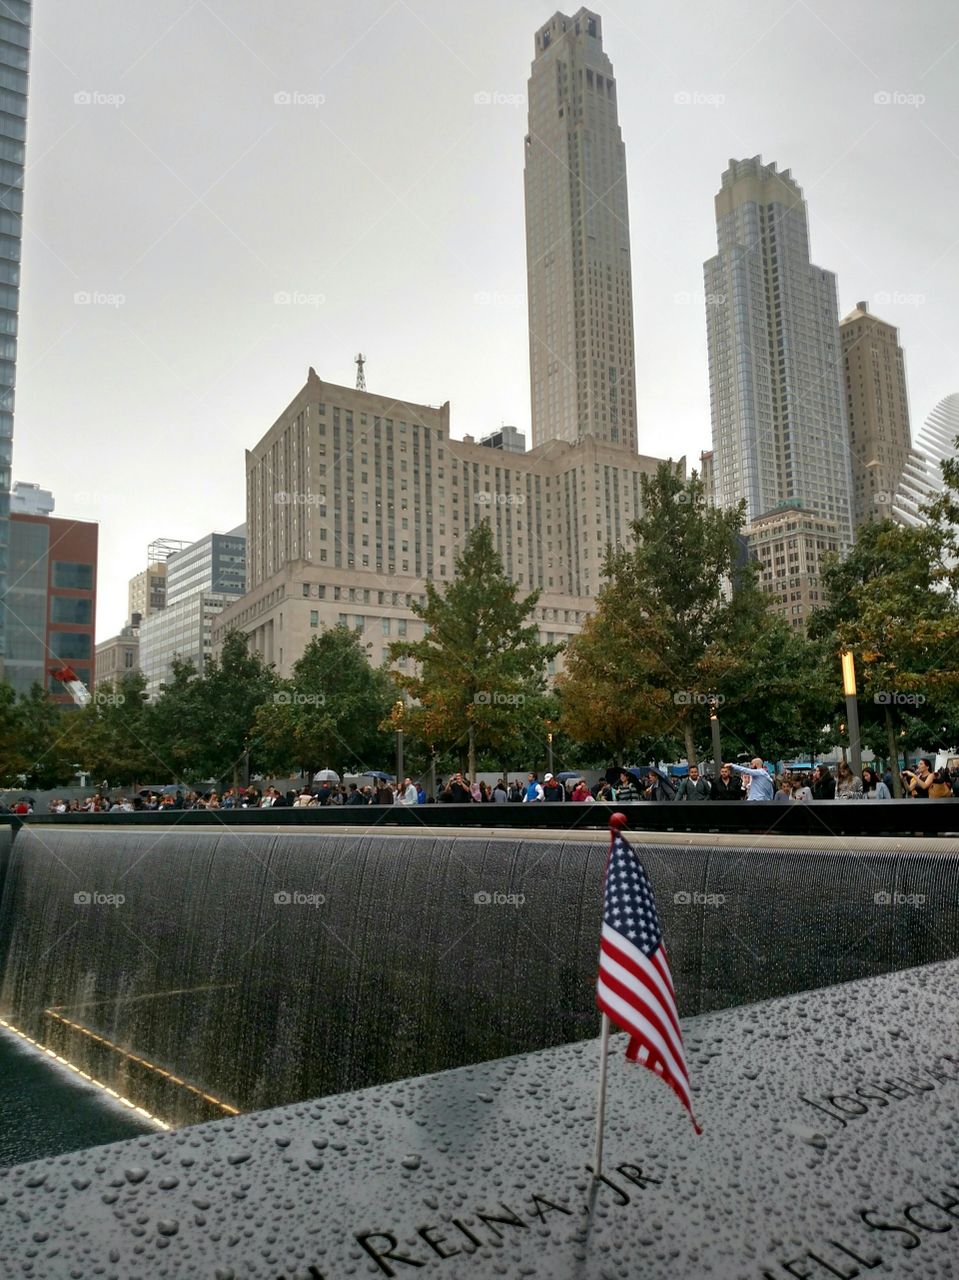 Expanse Of The 9/11 Memorial